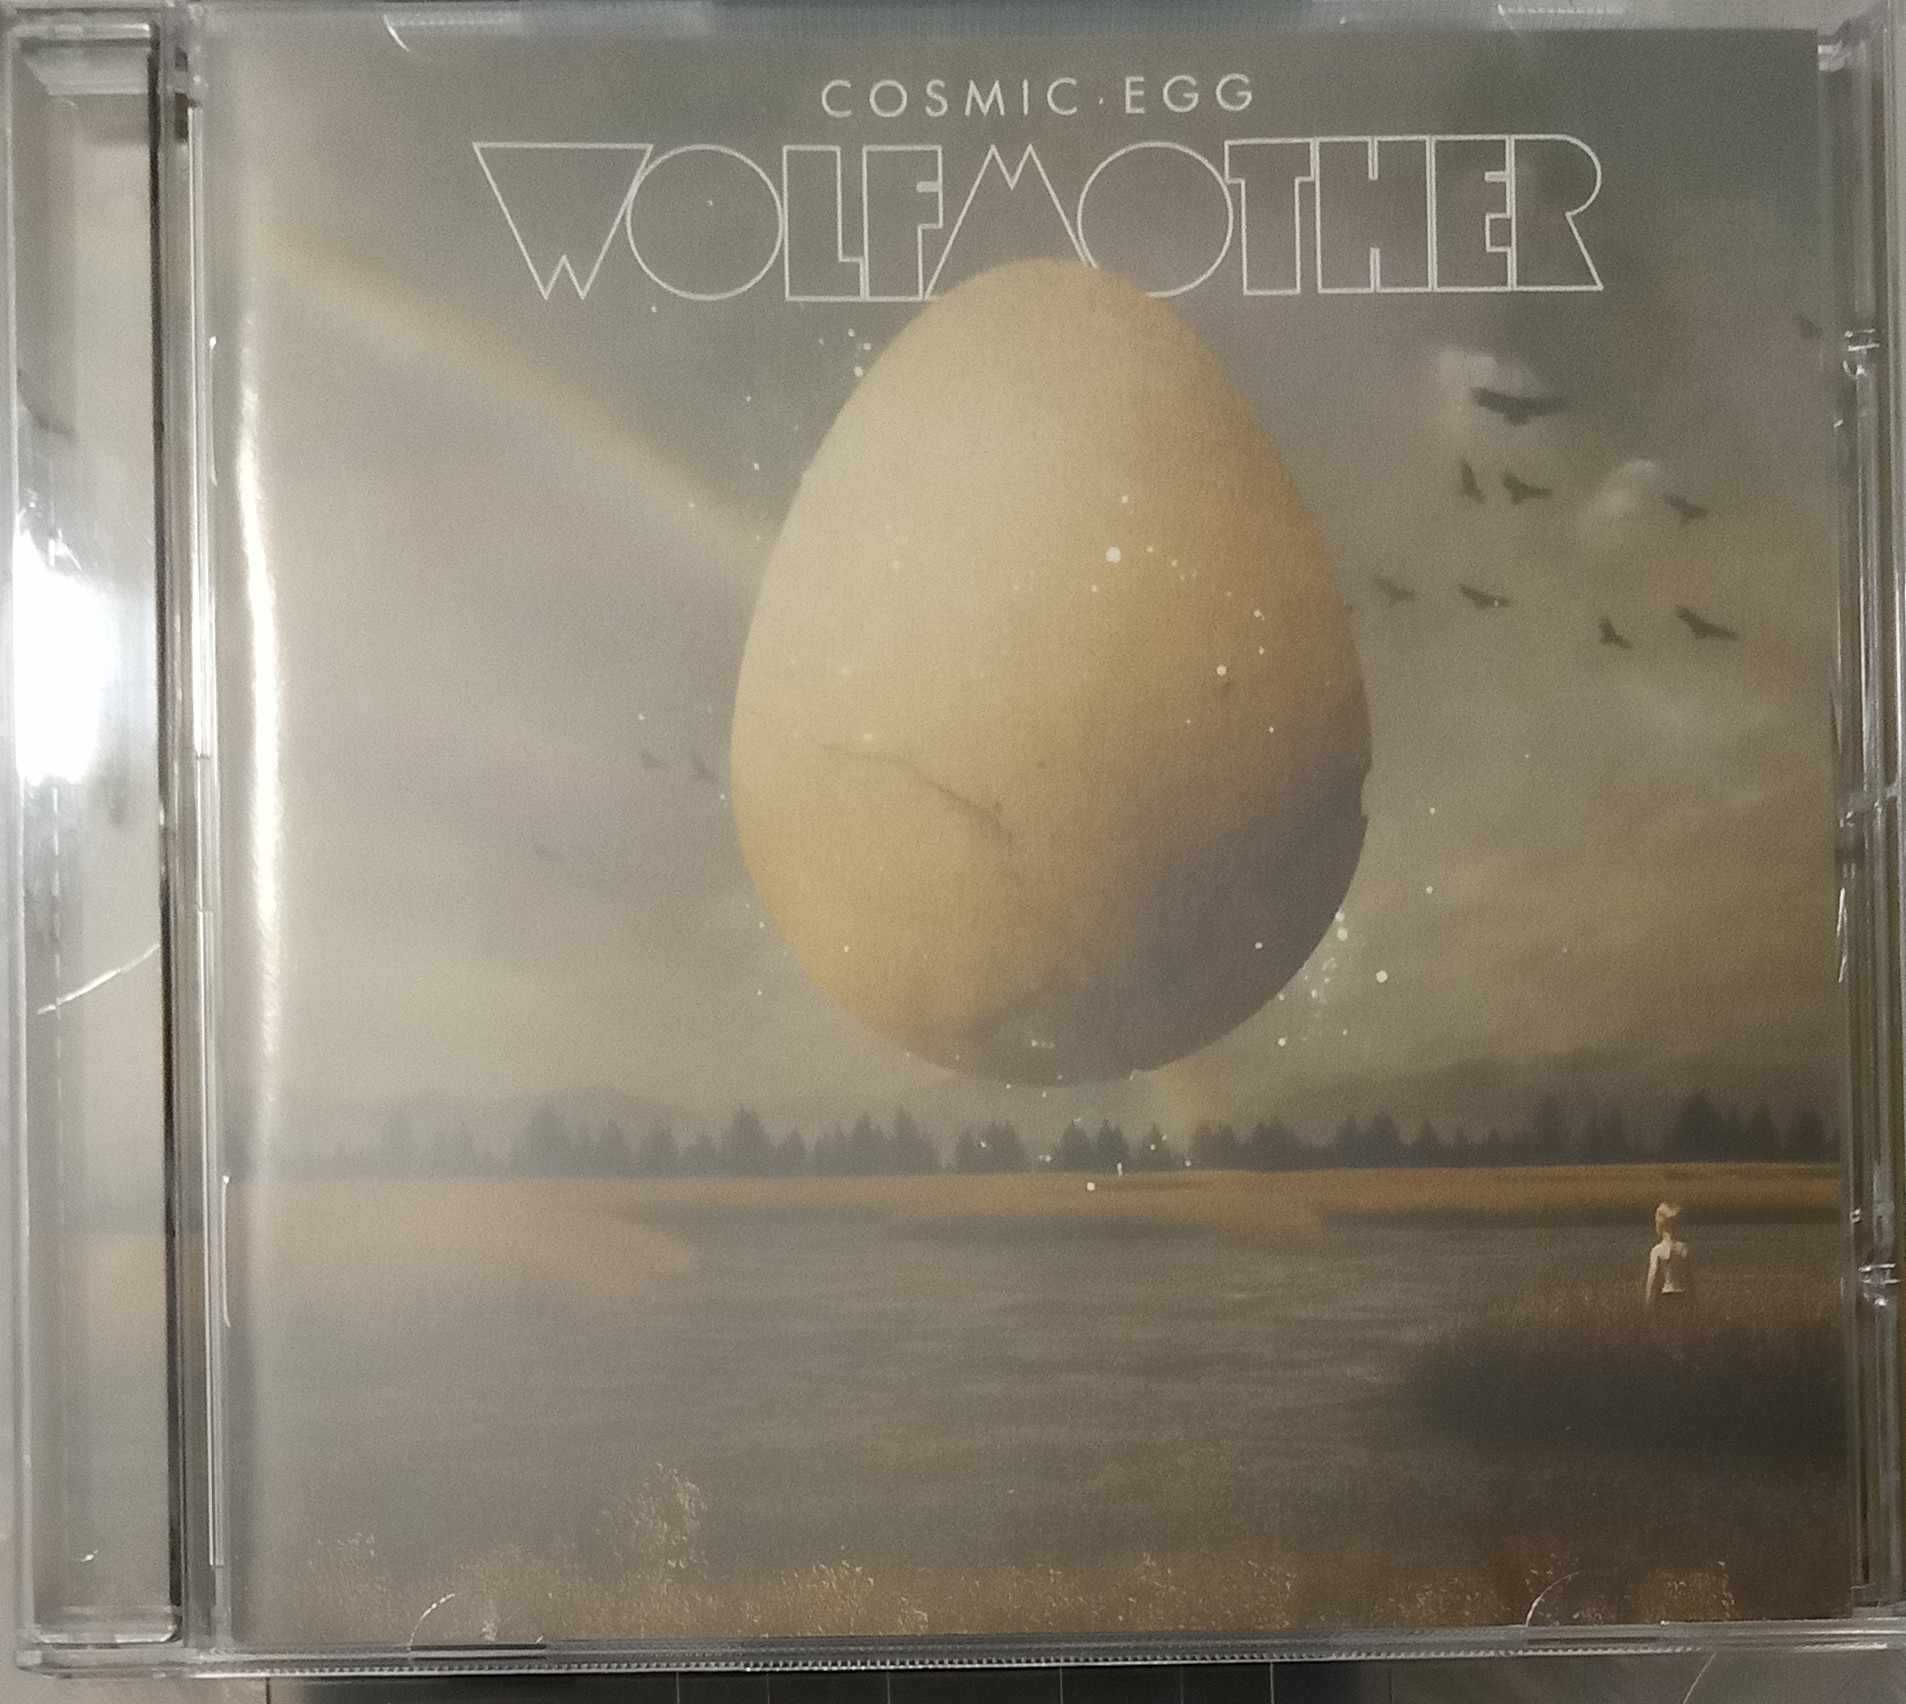 Wolfmother - Cosmic Egg (CD) Nowa